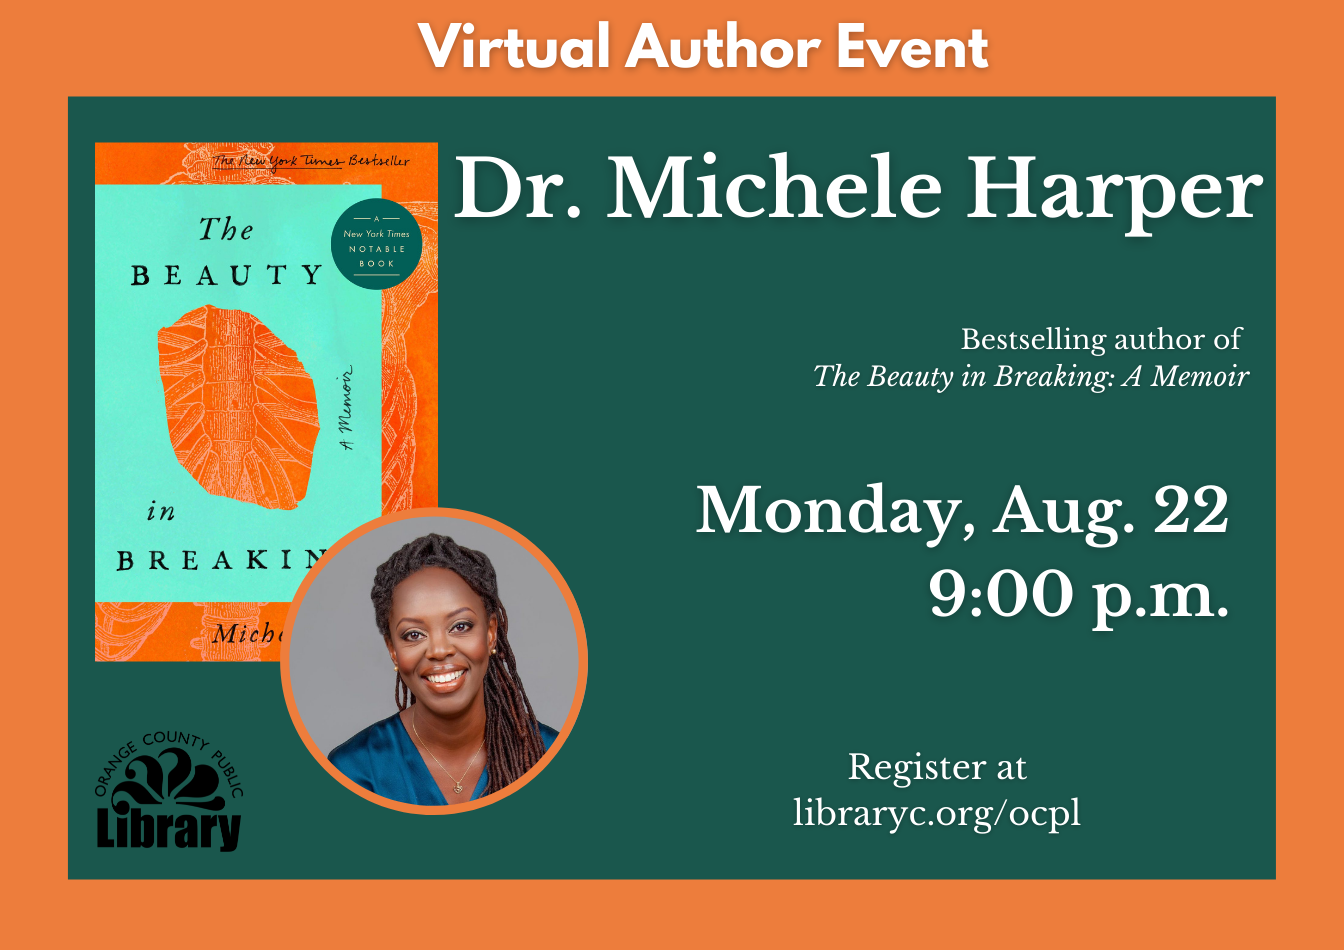 Widget for a virtual author event with Dr. Michele Harper